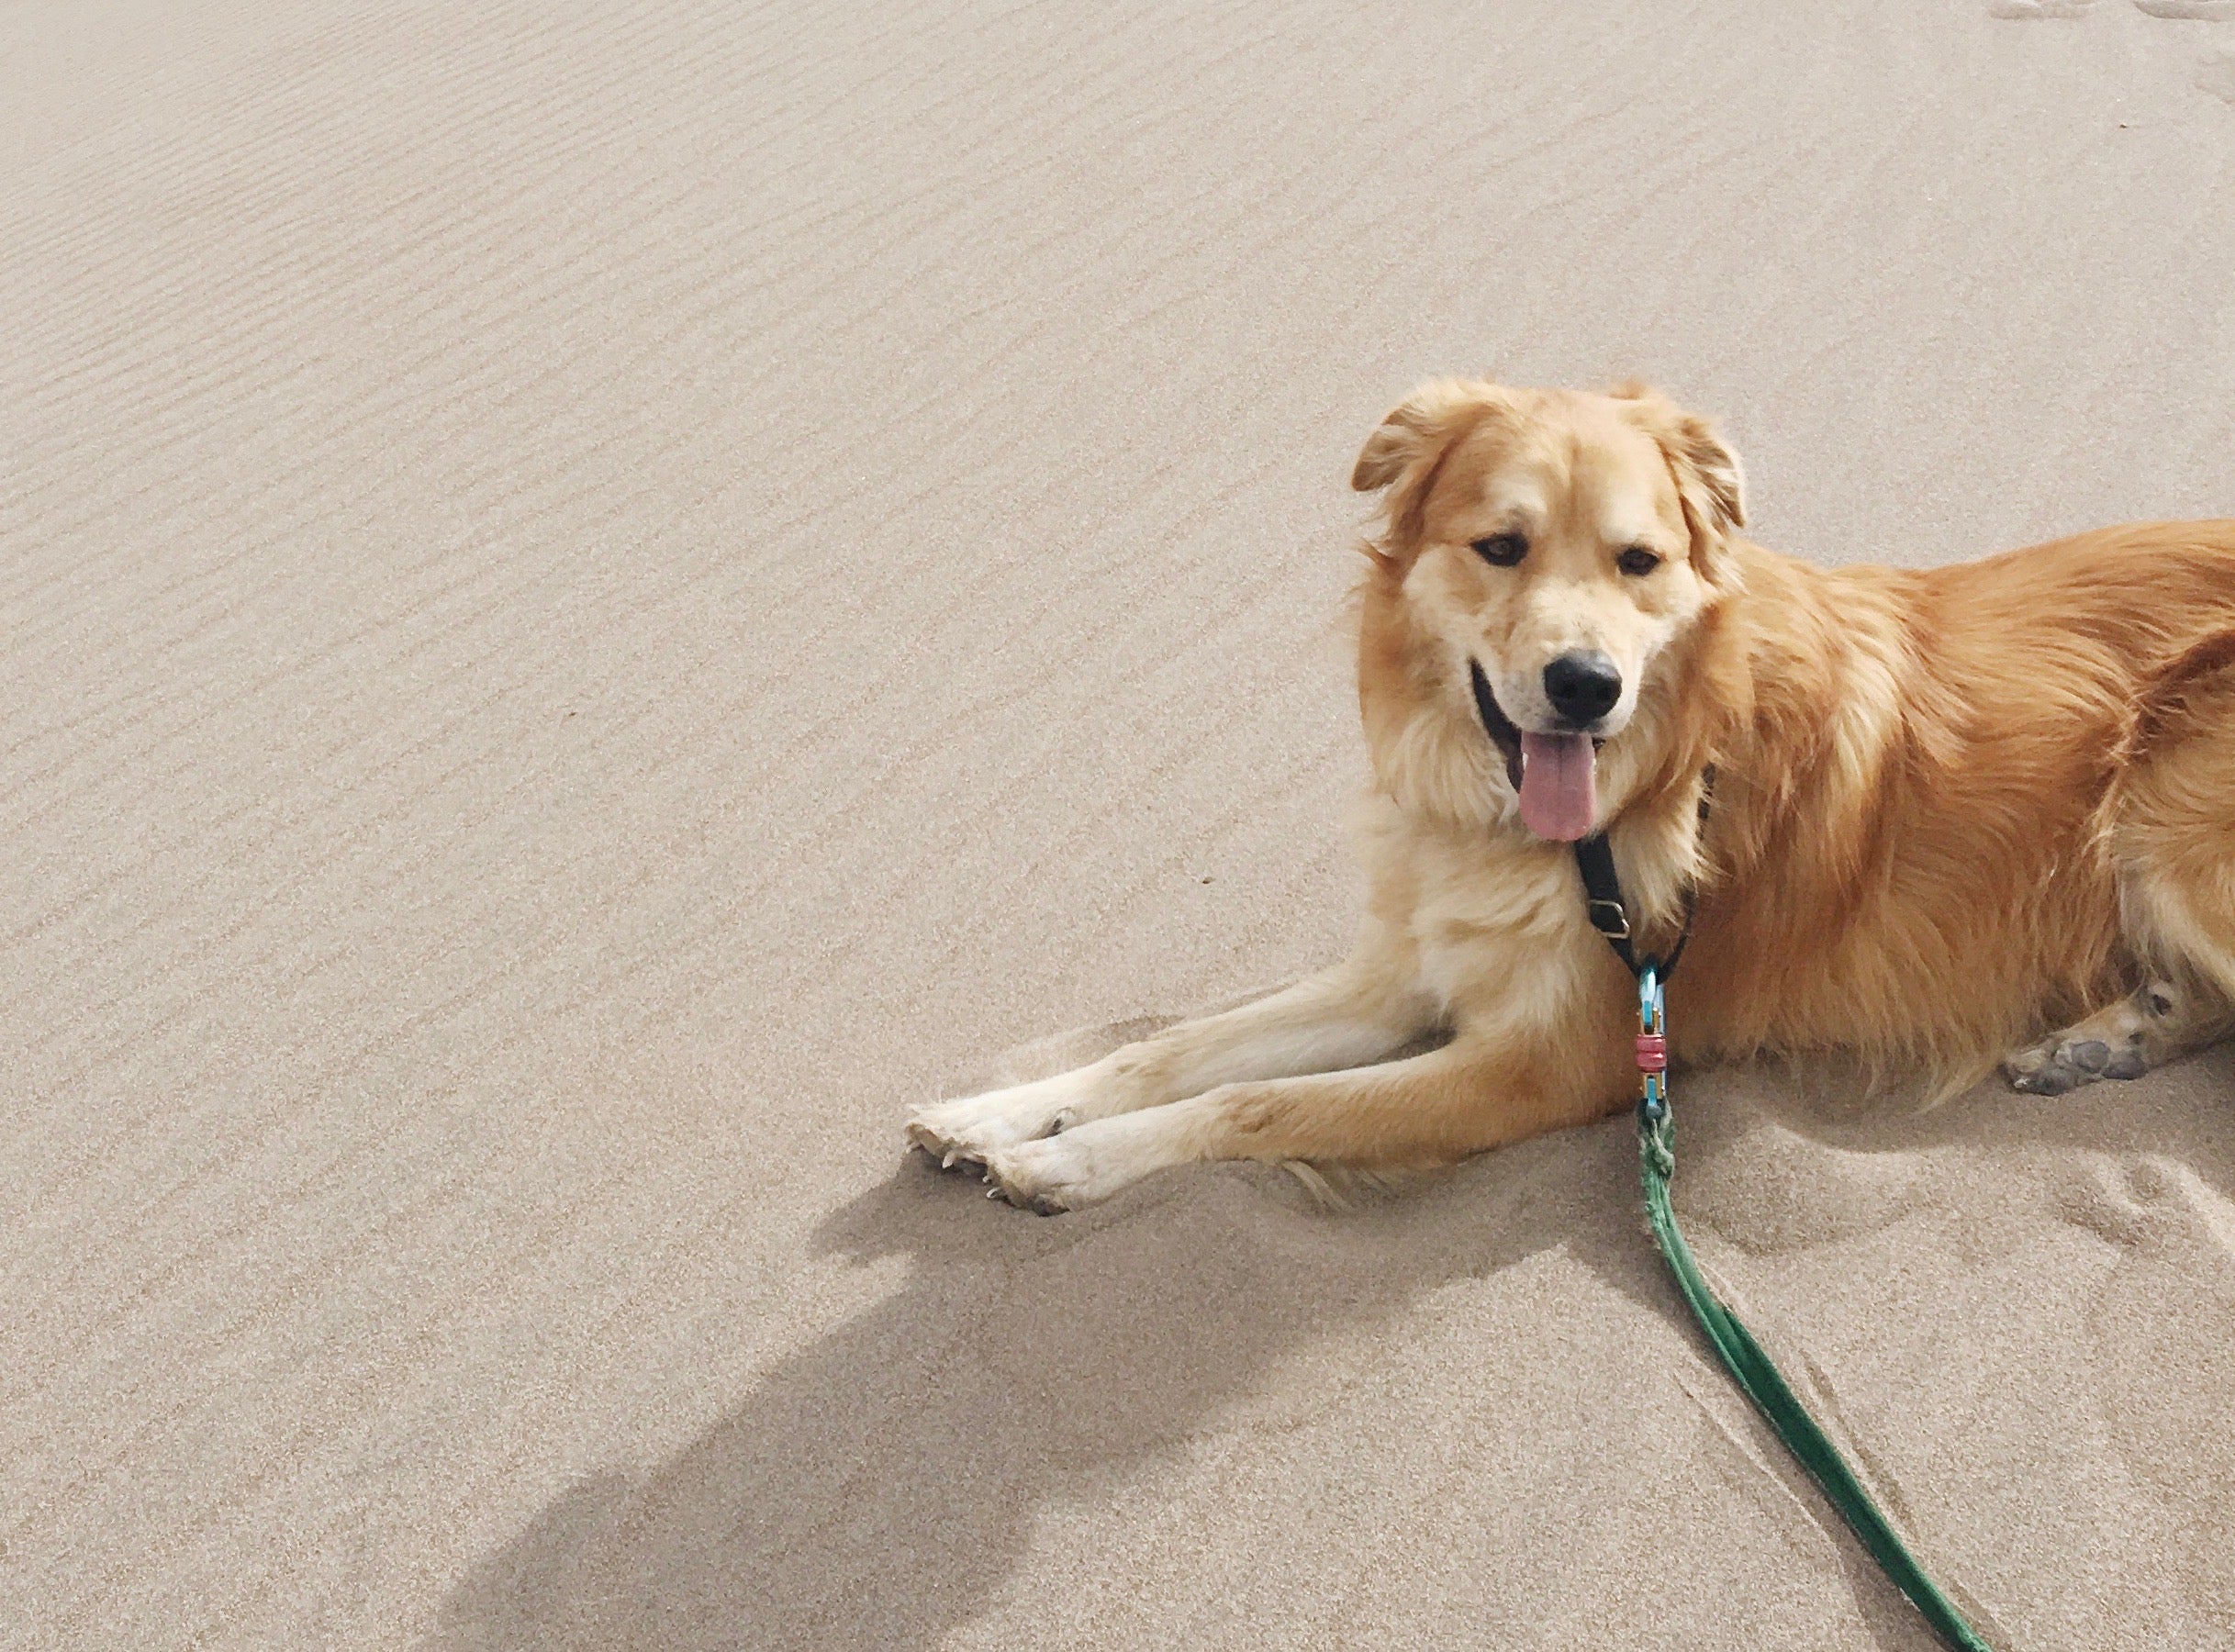 Dog lying in the sand